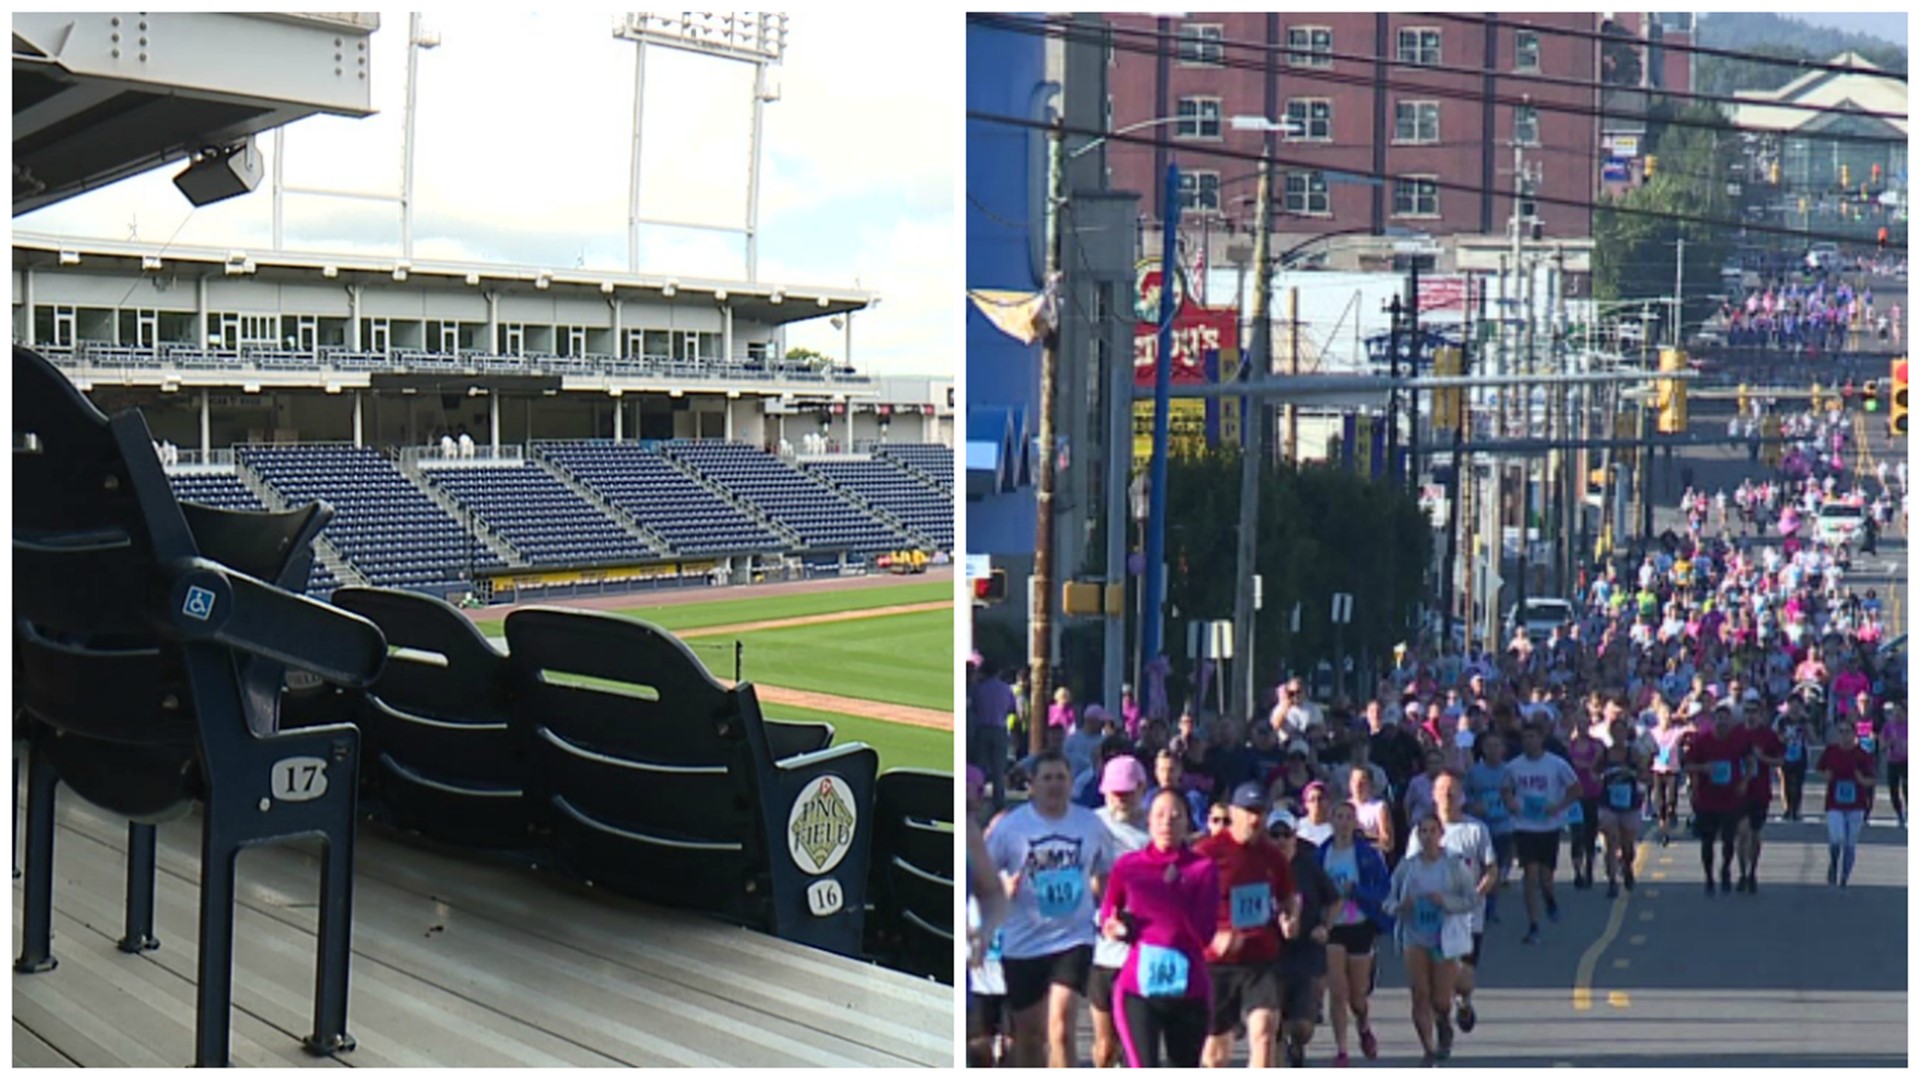 Newswatch 16 spoke with the RailRiders president and the director of Susan G. Komen of Greater PA.